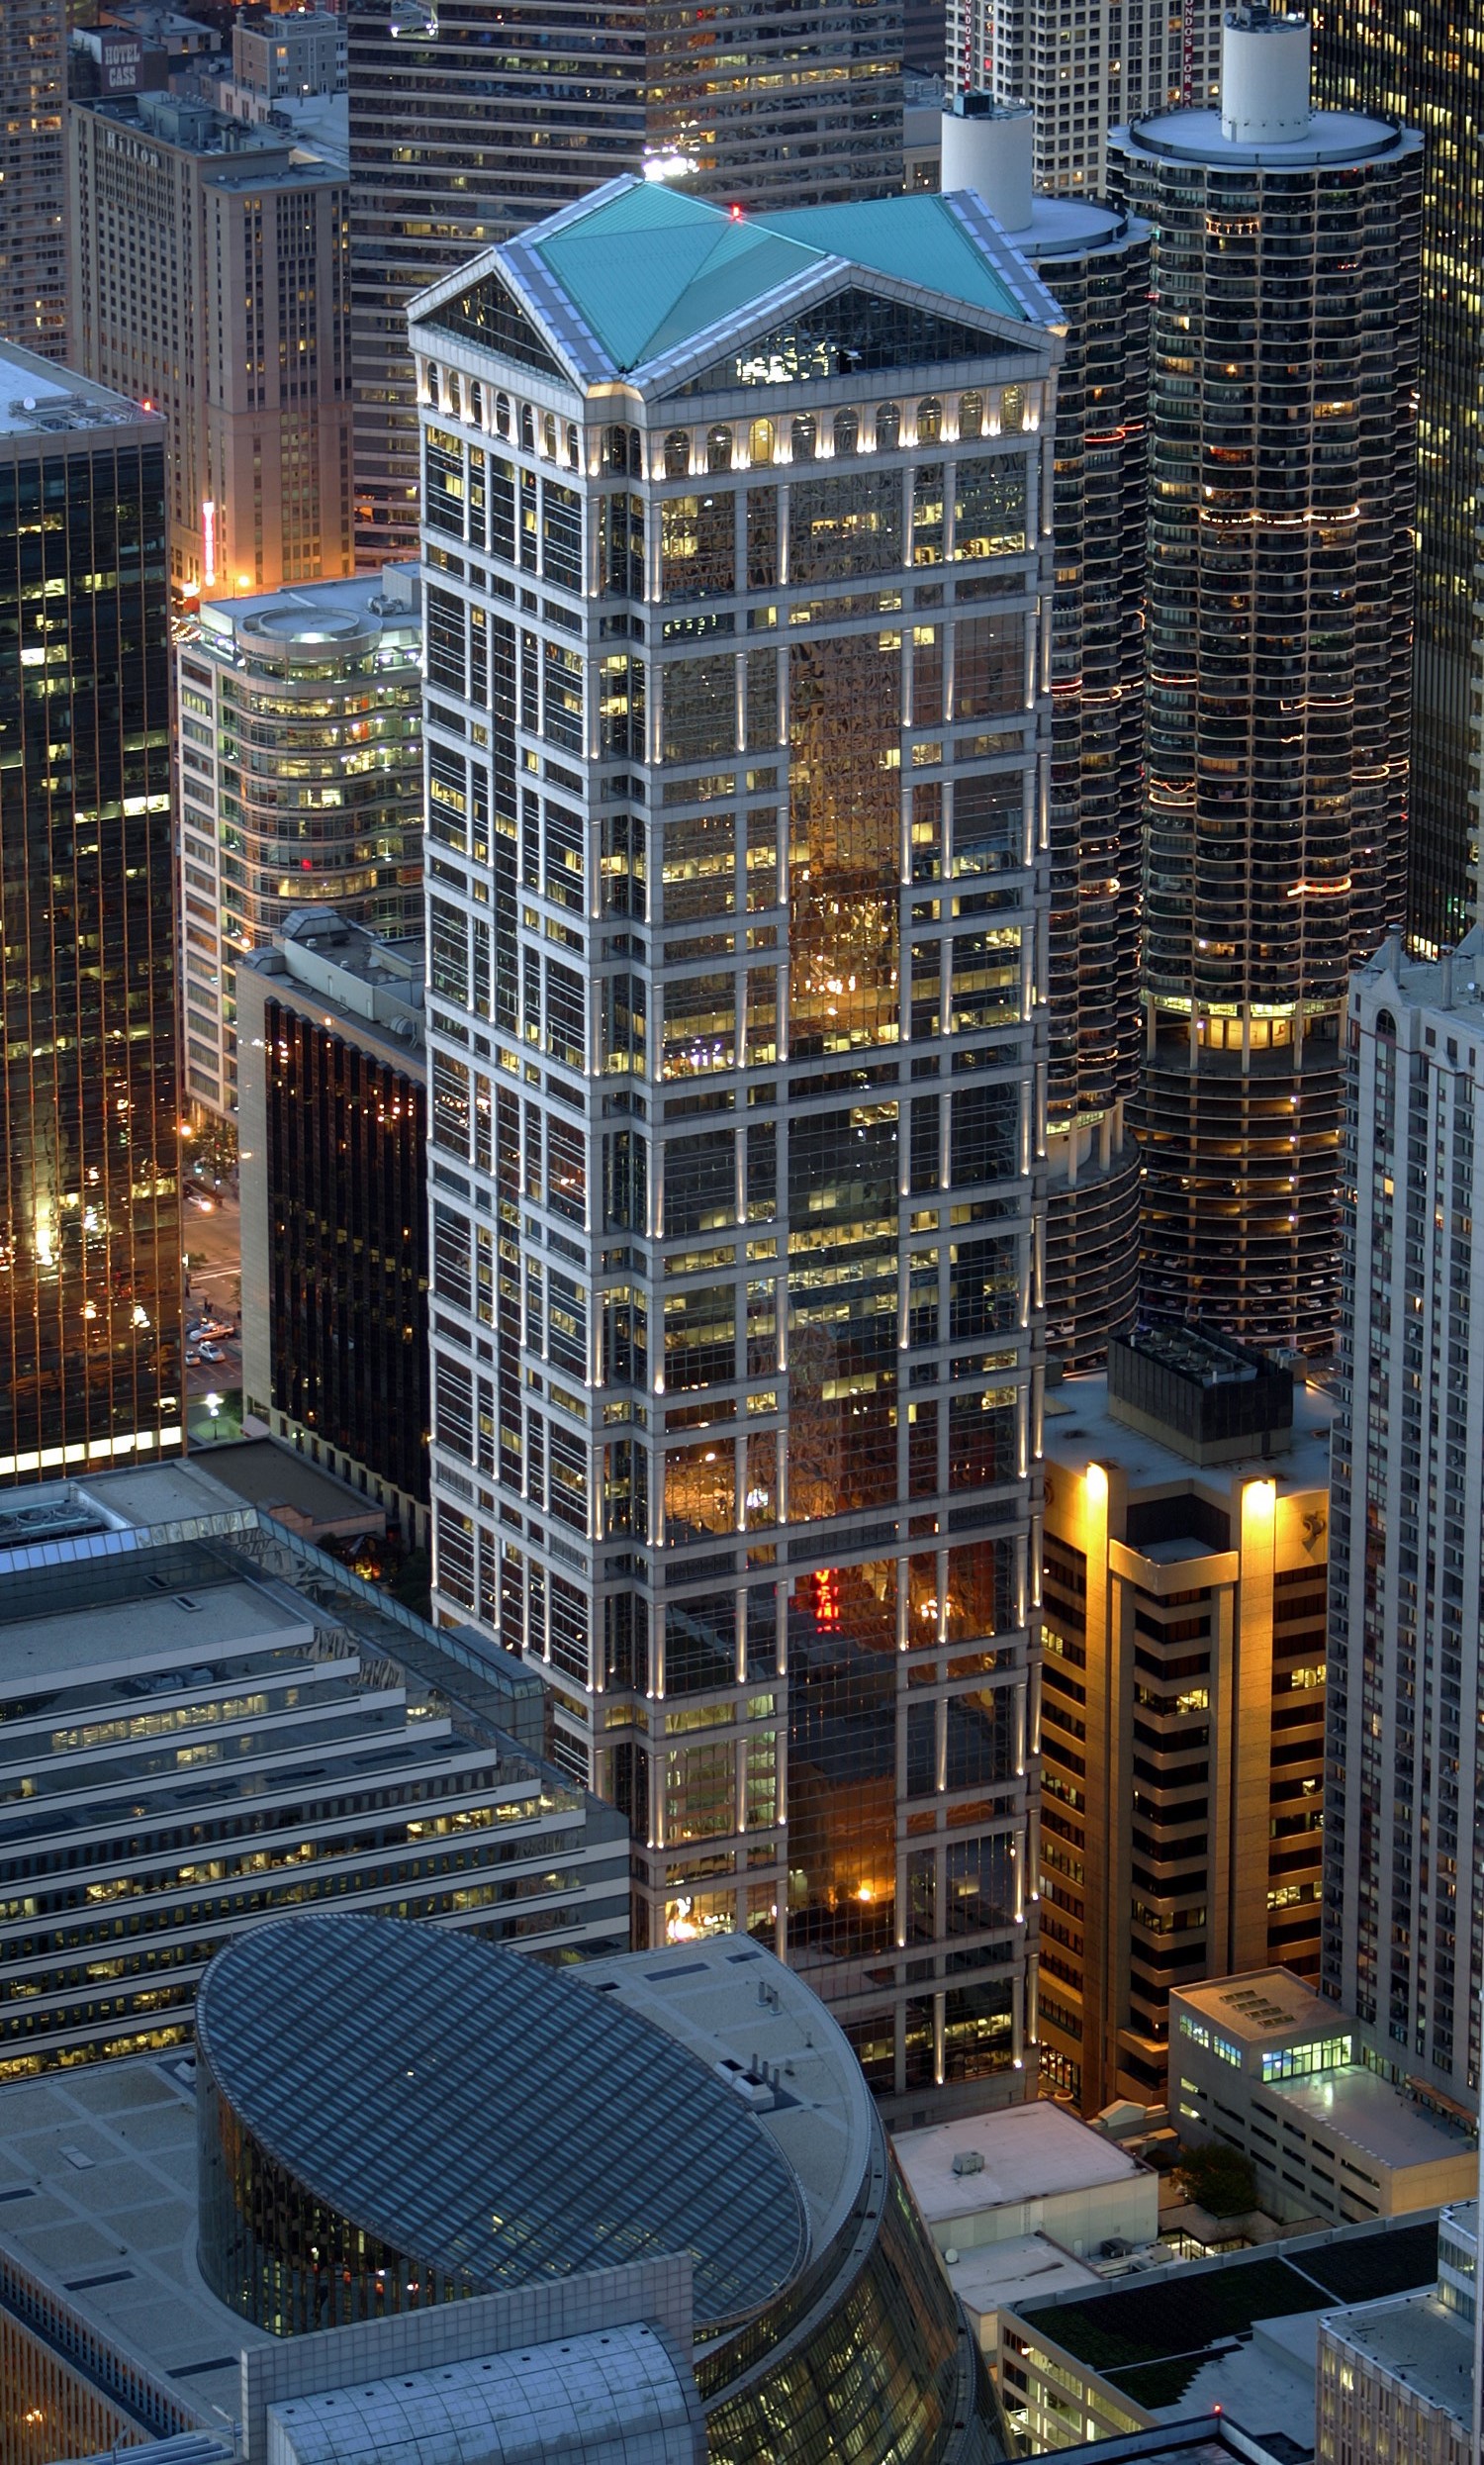 77 West Wacker Drive - Night view from Sears Tower 